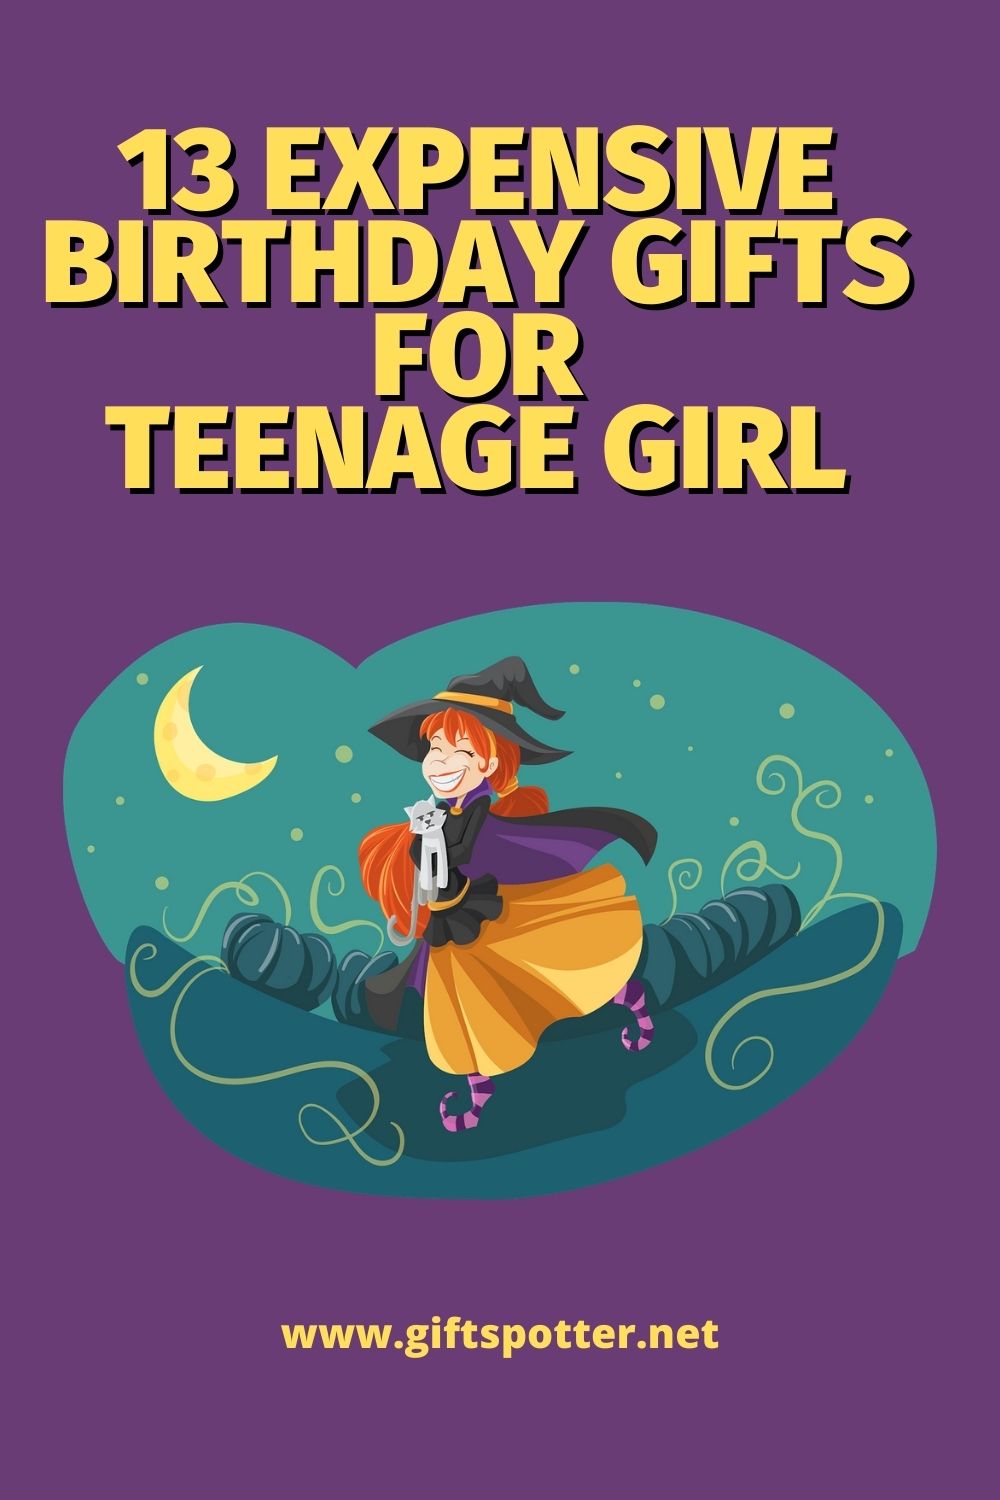 13 Expensive Birthday Gifts for Teenage Girl 